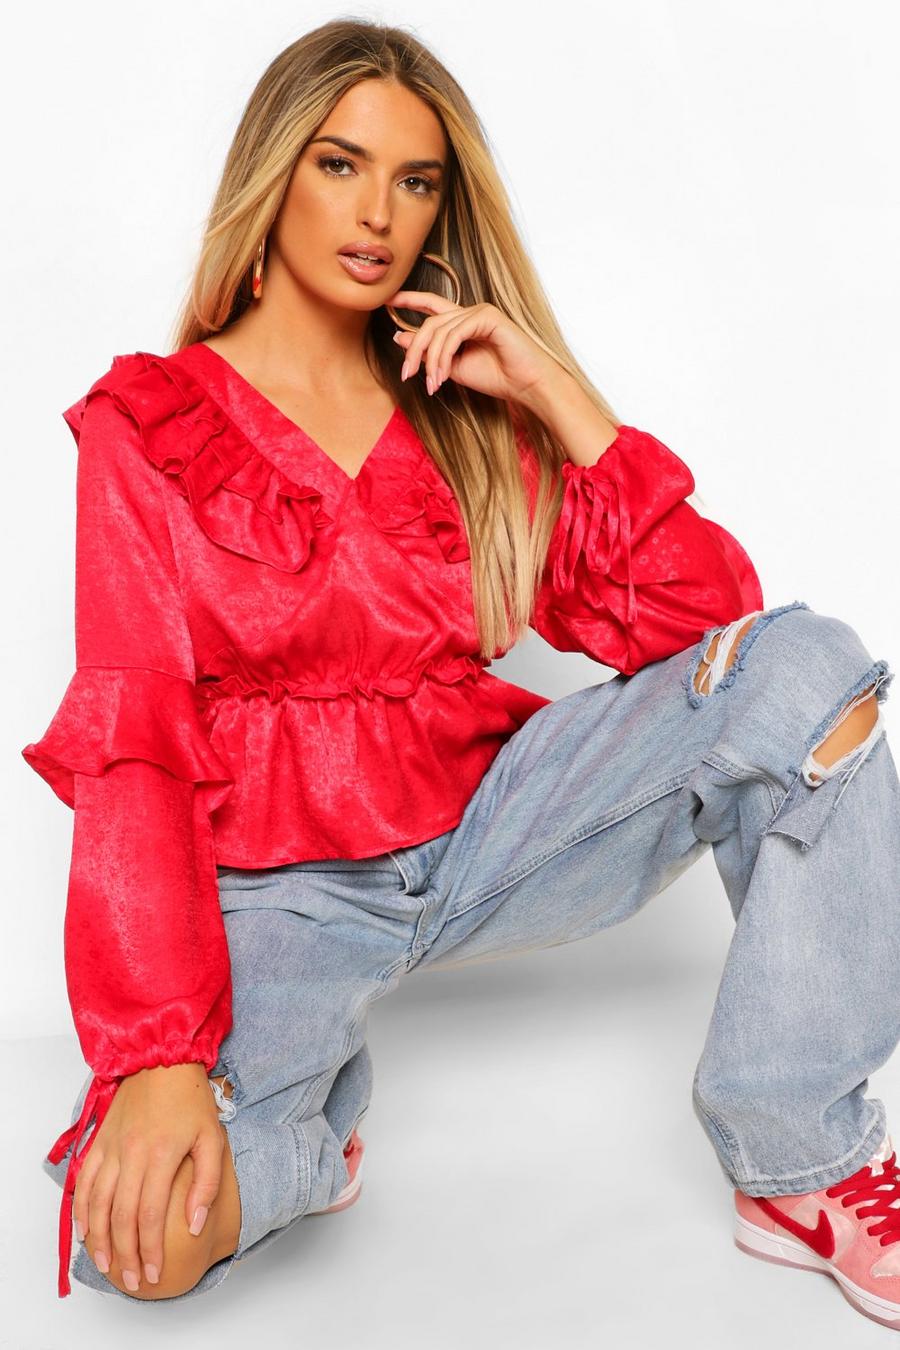 Red Jacquard Ruffle Blouse image number 1